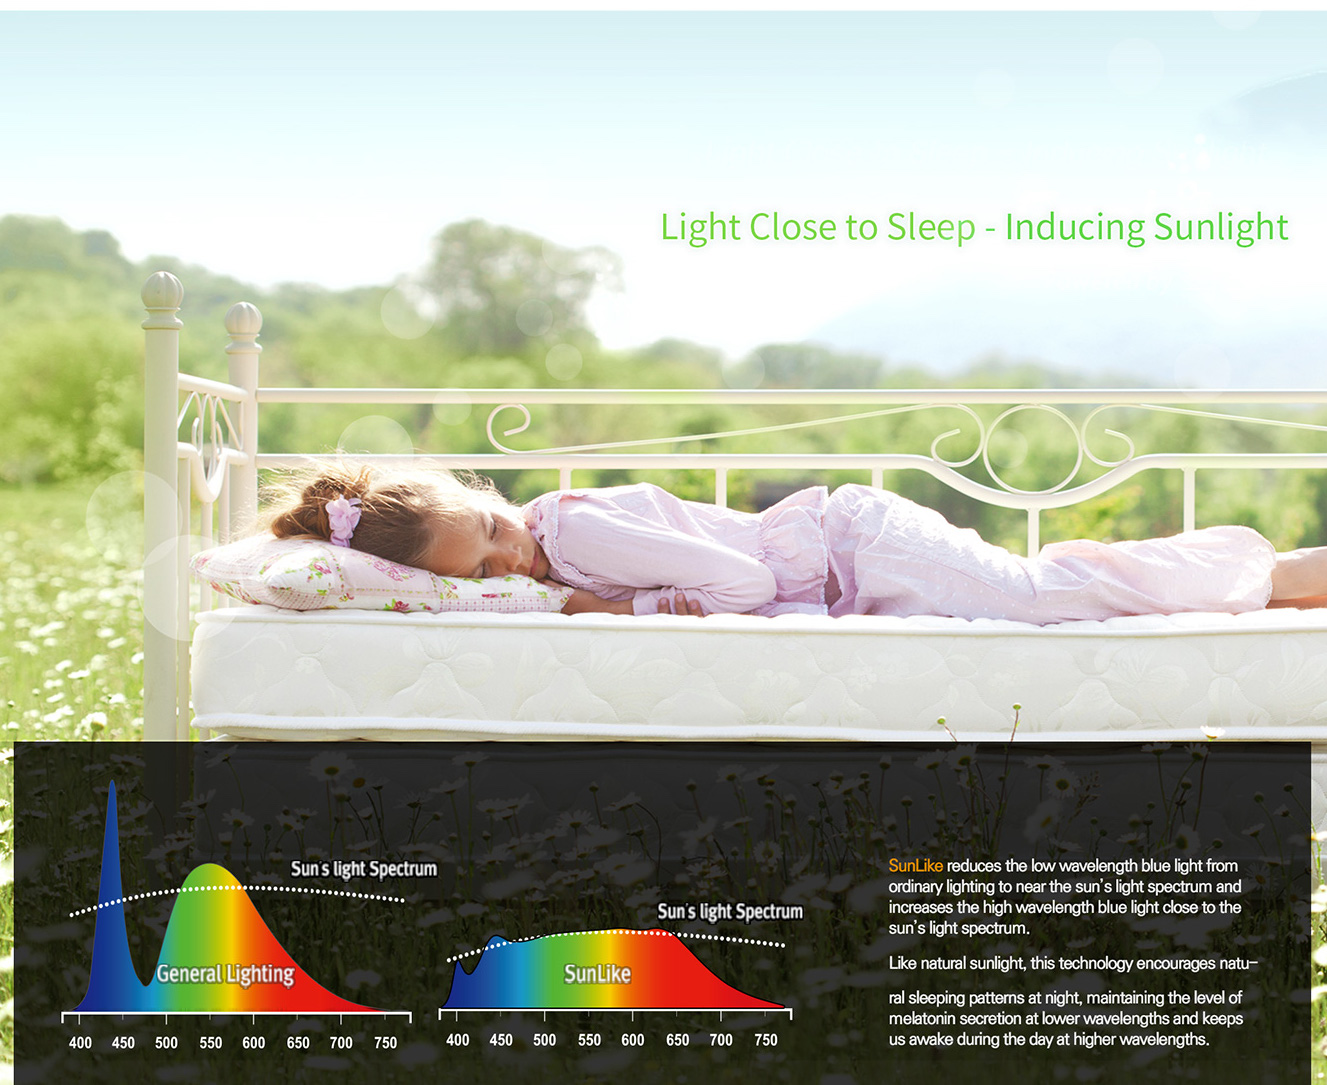 Seoul SunLike LEDs ease eye strain and improve sleep patterns, two research studies suggest